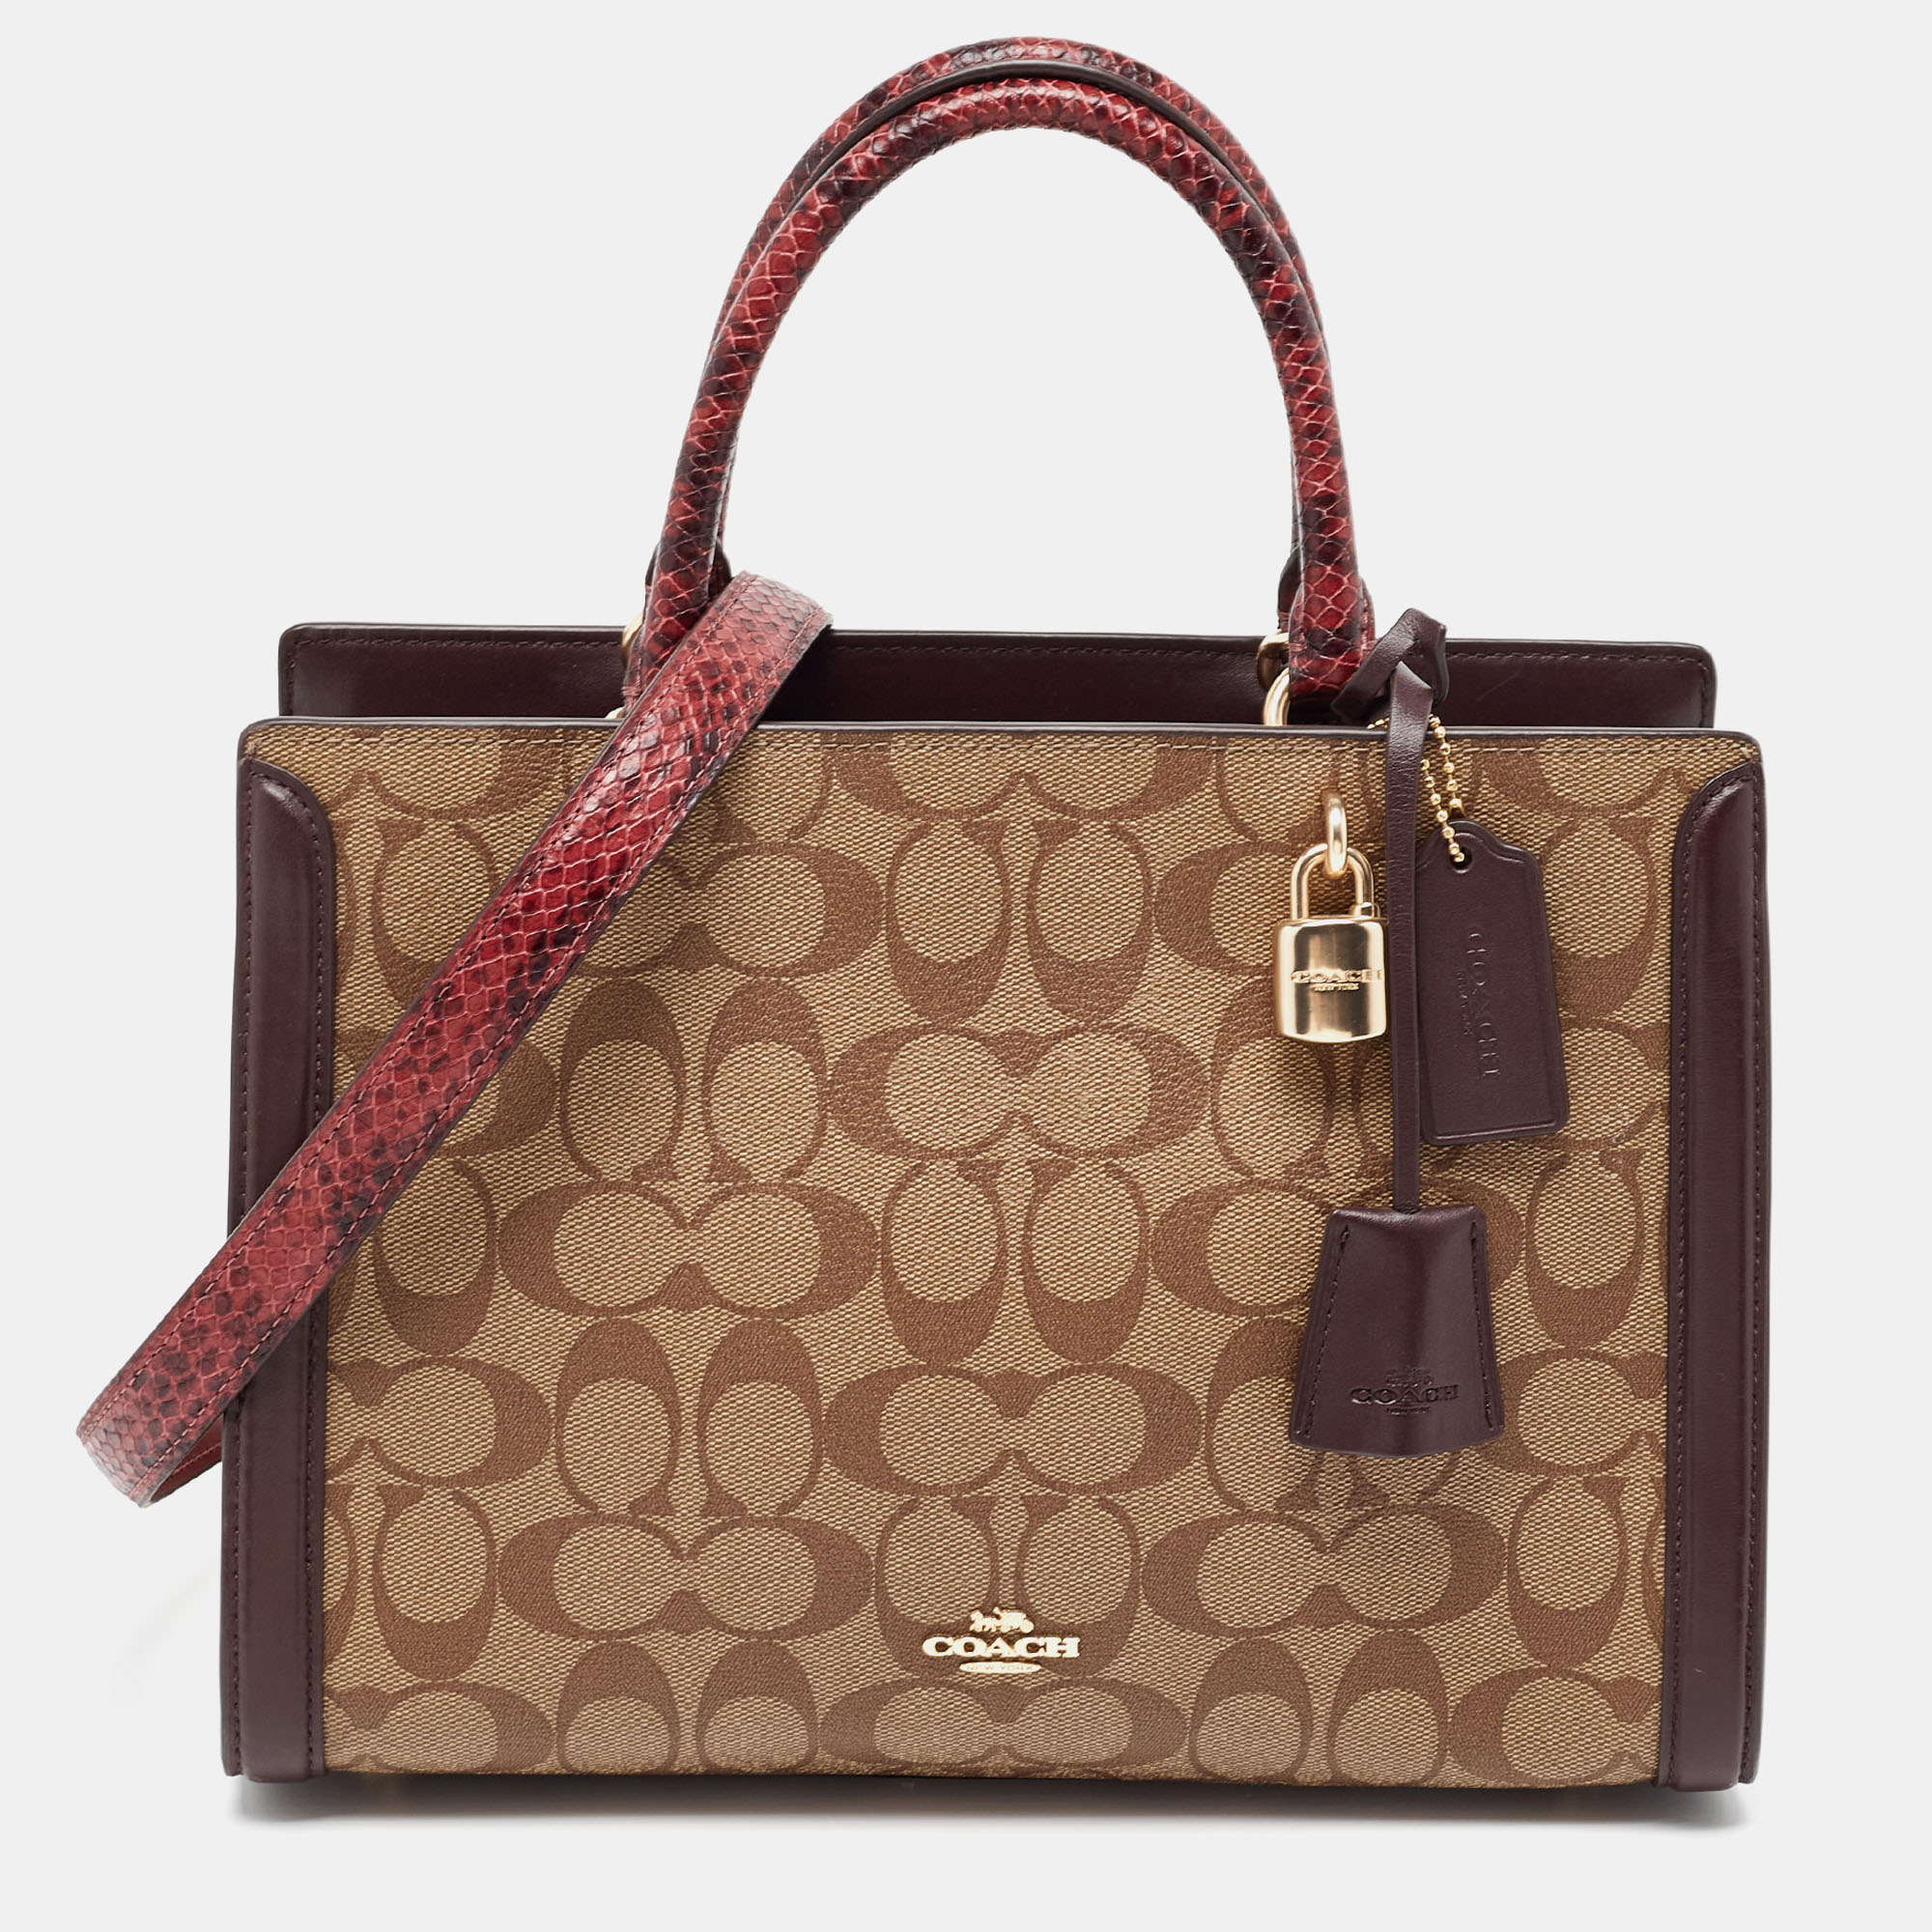 Coach Burgundy/Beige Signature Coated And Leather Zoe Carryall Tote